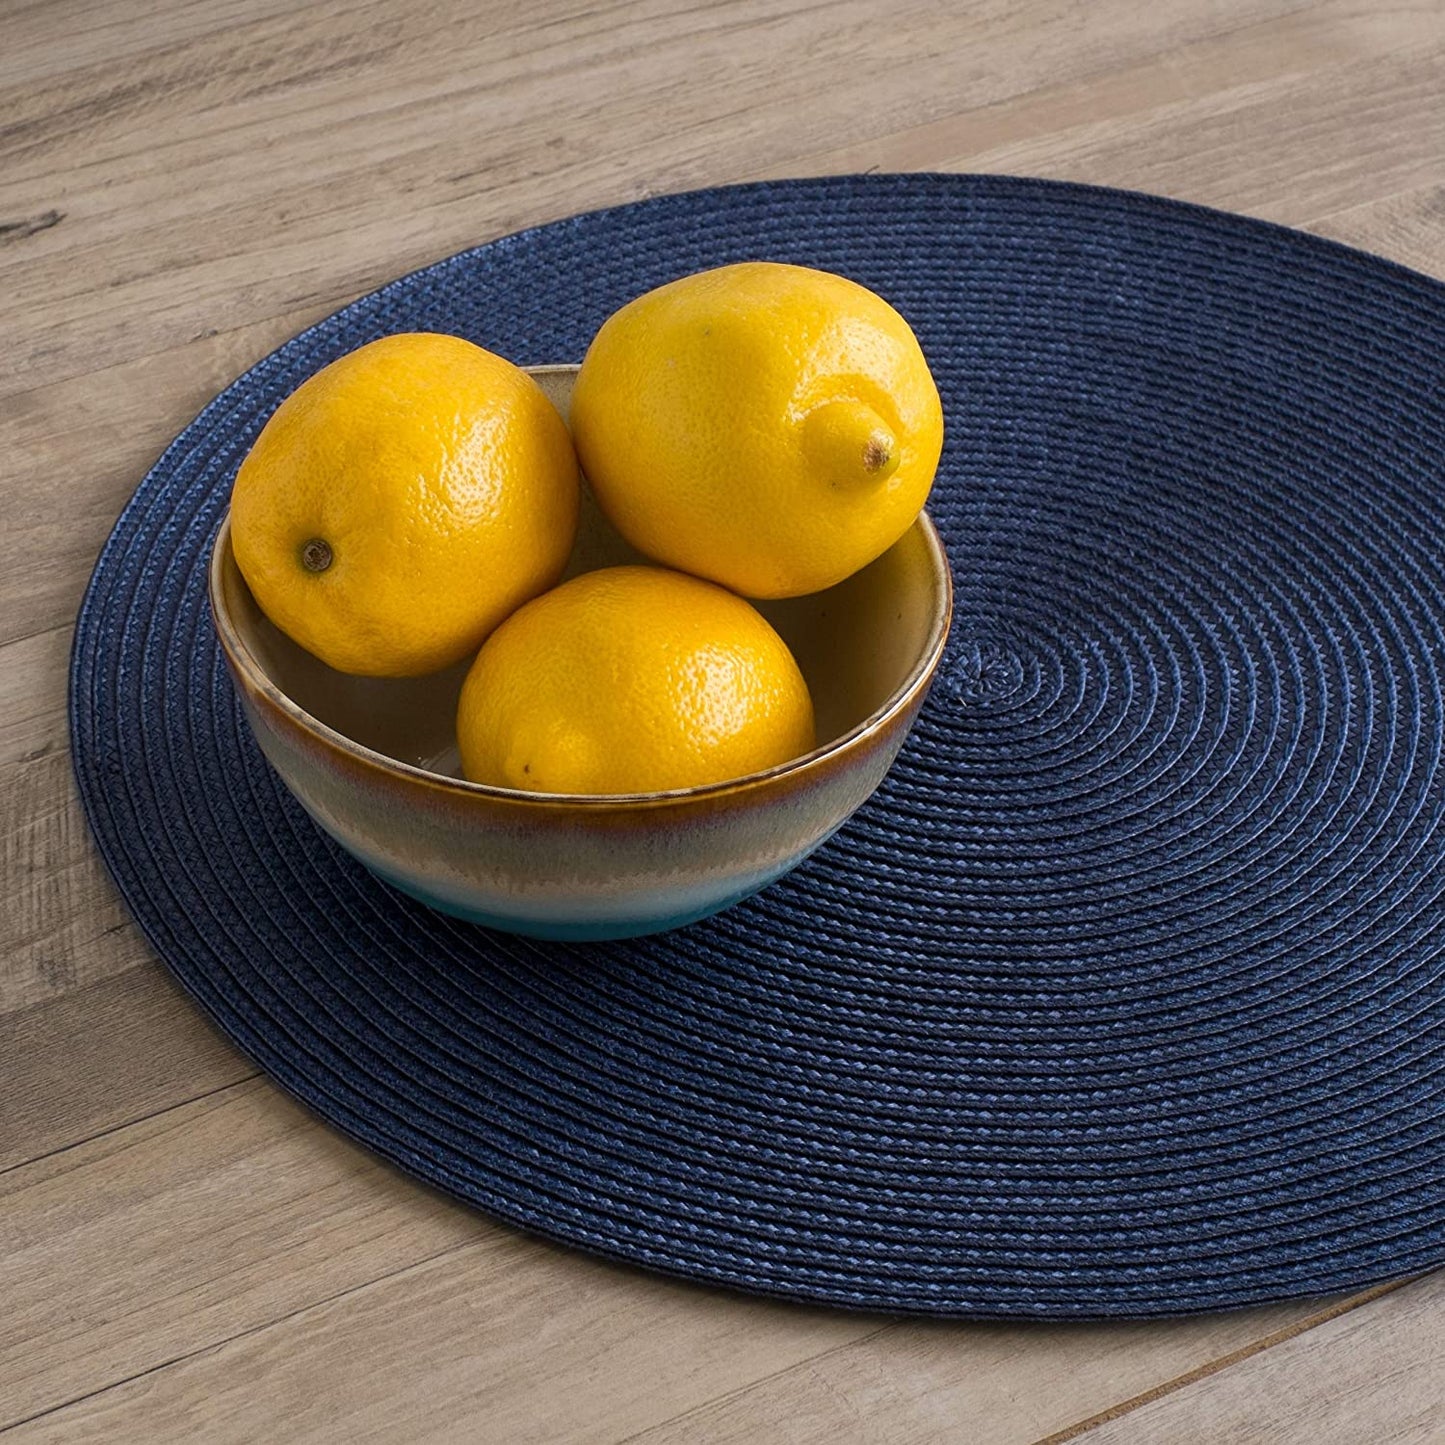 blue placemat with bowl of lemons on it.